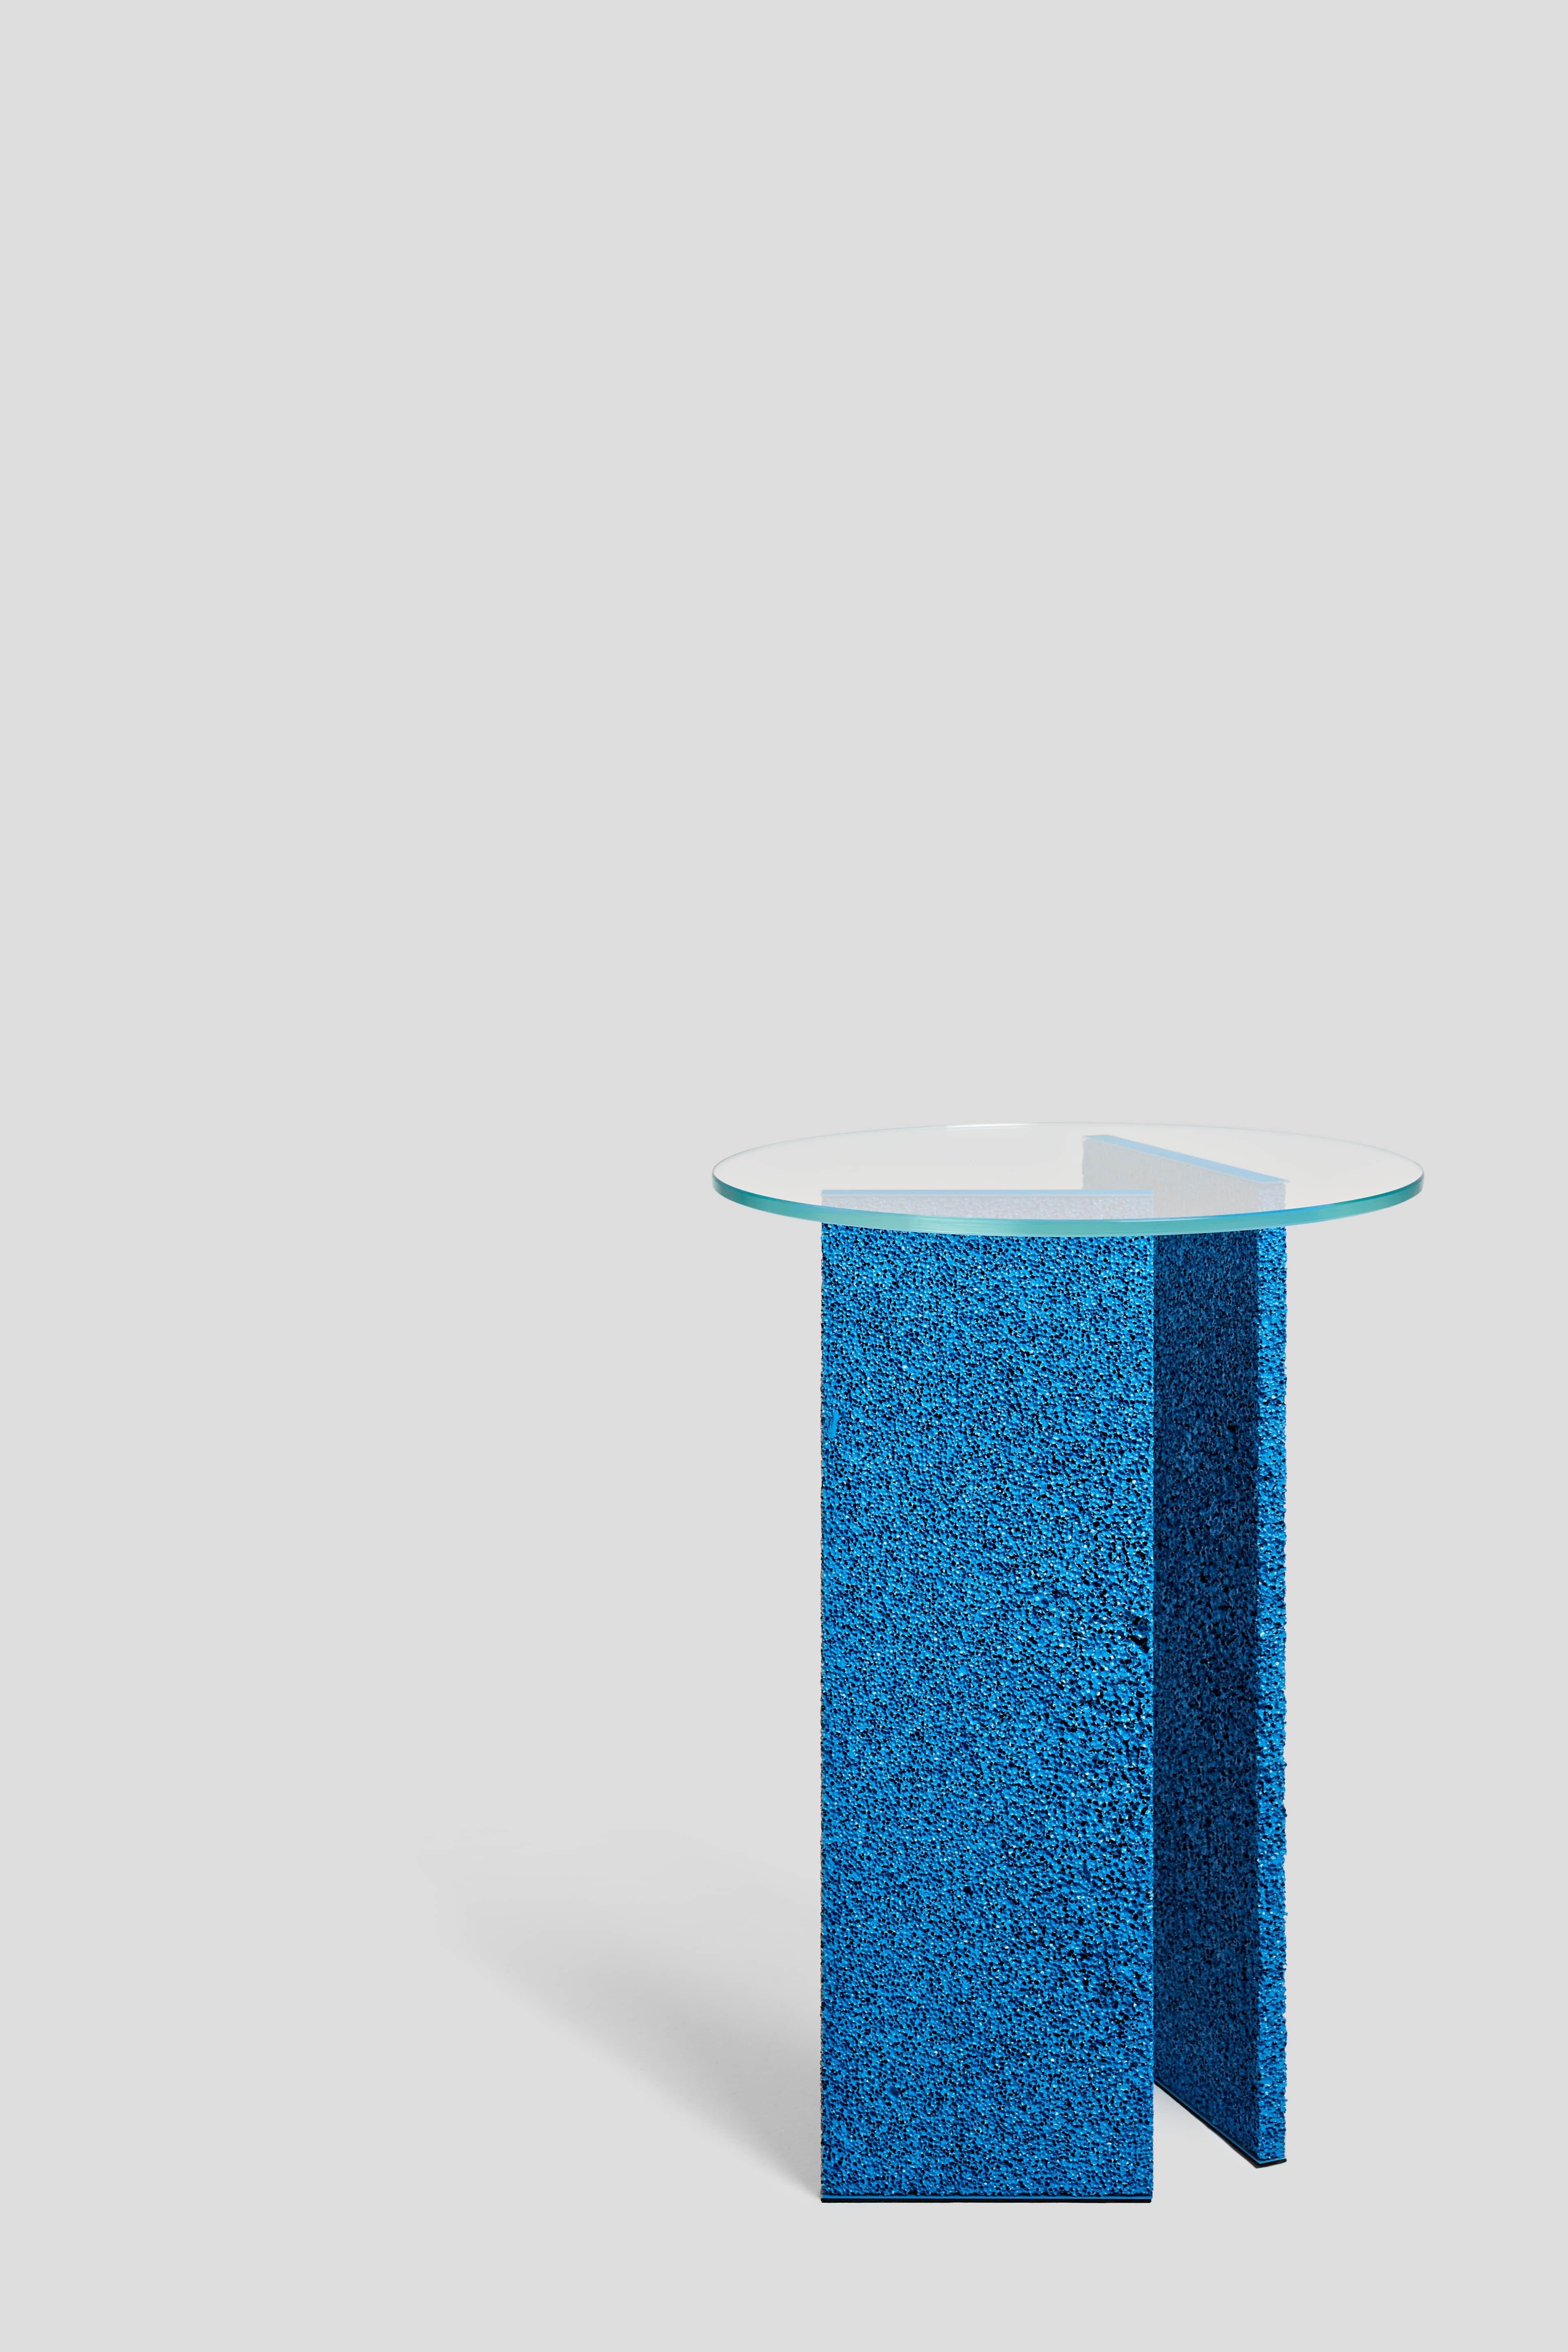 Cast SLAB Textured Blue Side Table with Metal Legs and Glass Top For Sale